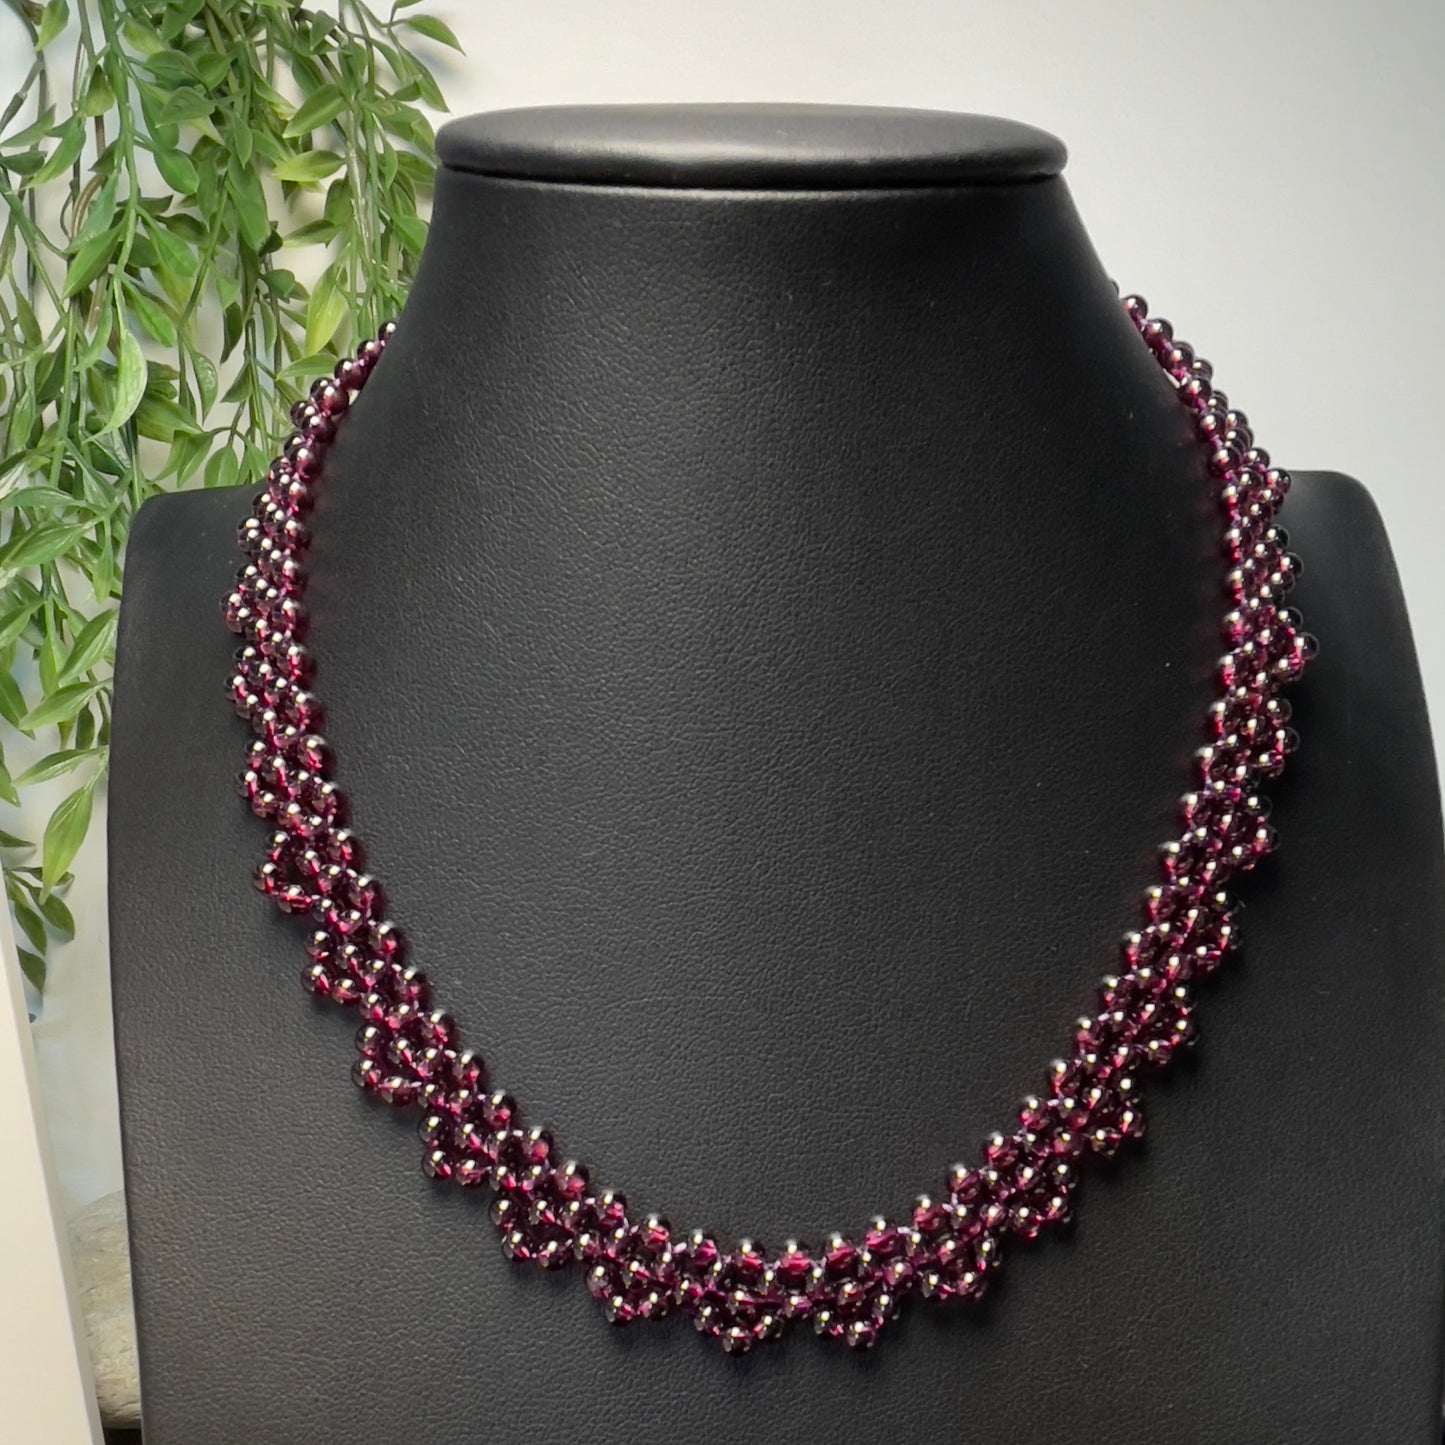 Stonelry High-Quality Natural Garnet Beaded Necklace